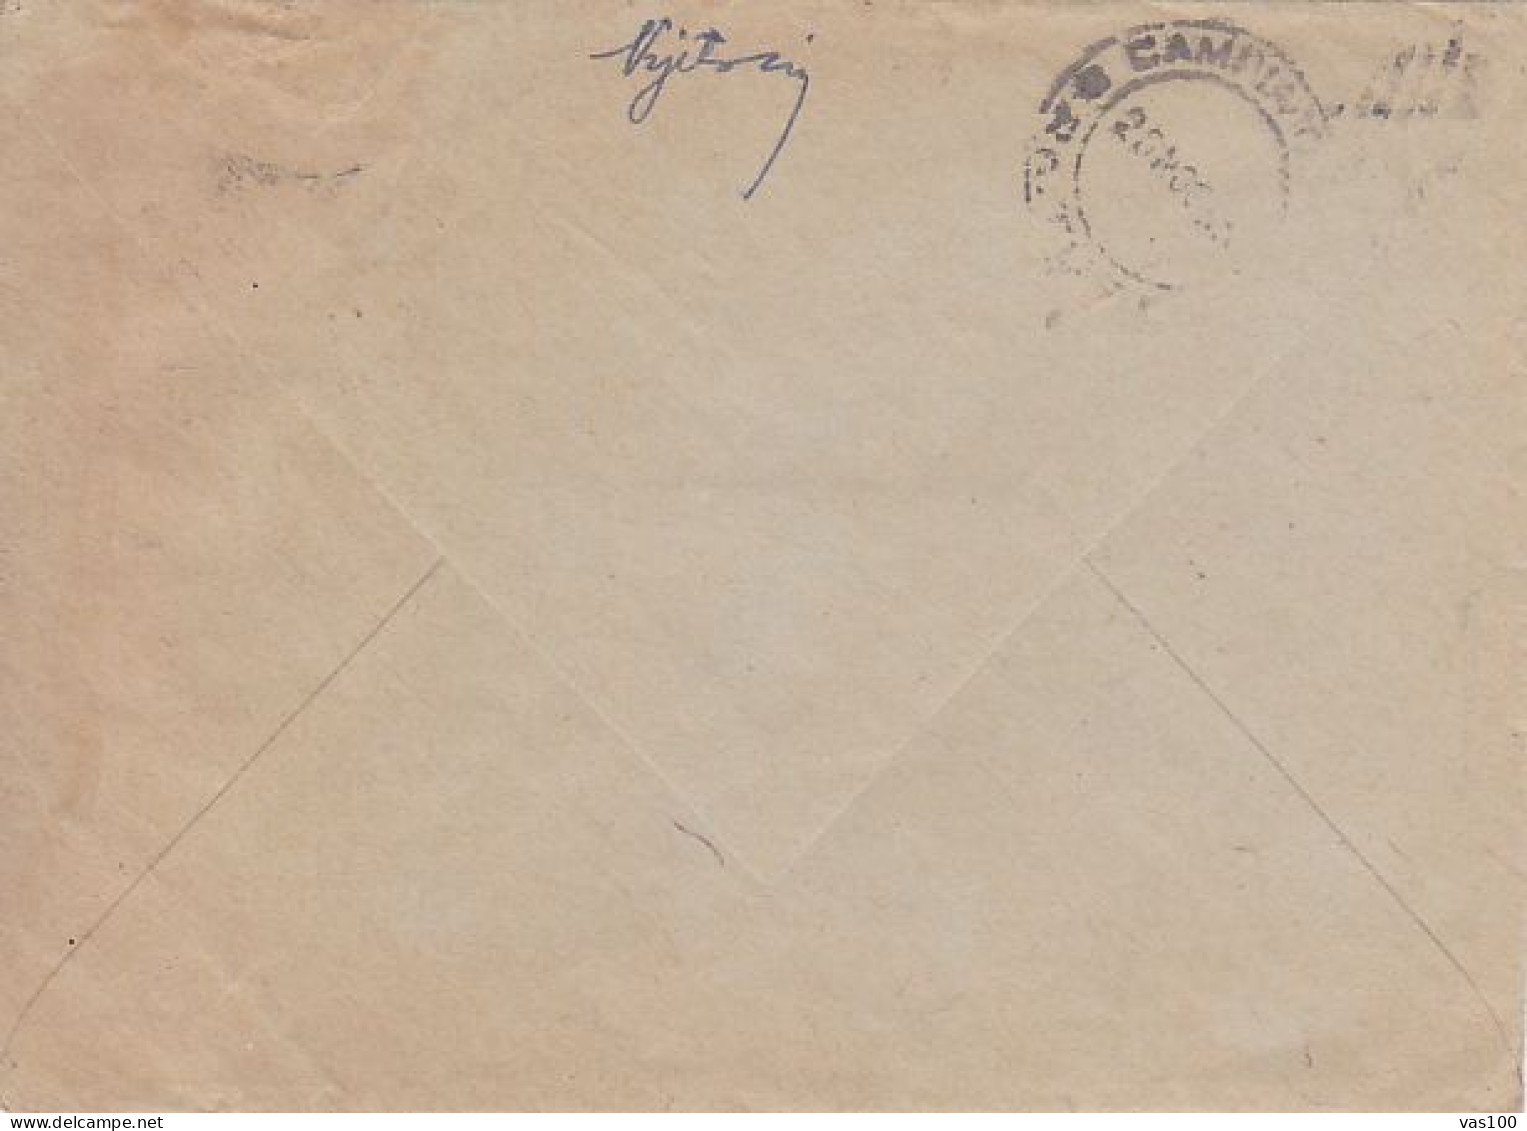 BUCHAREST YOUTH PIONEERS PALACE, STAMP ON COVER, 1951, ROMANIA - Briefe U. Dokumente